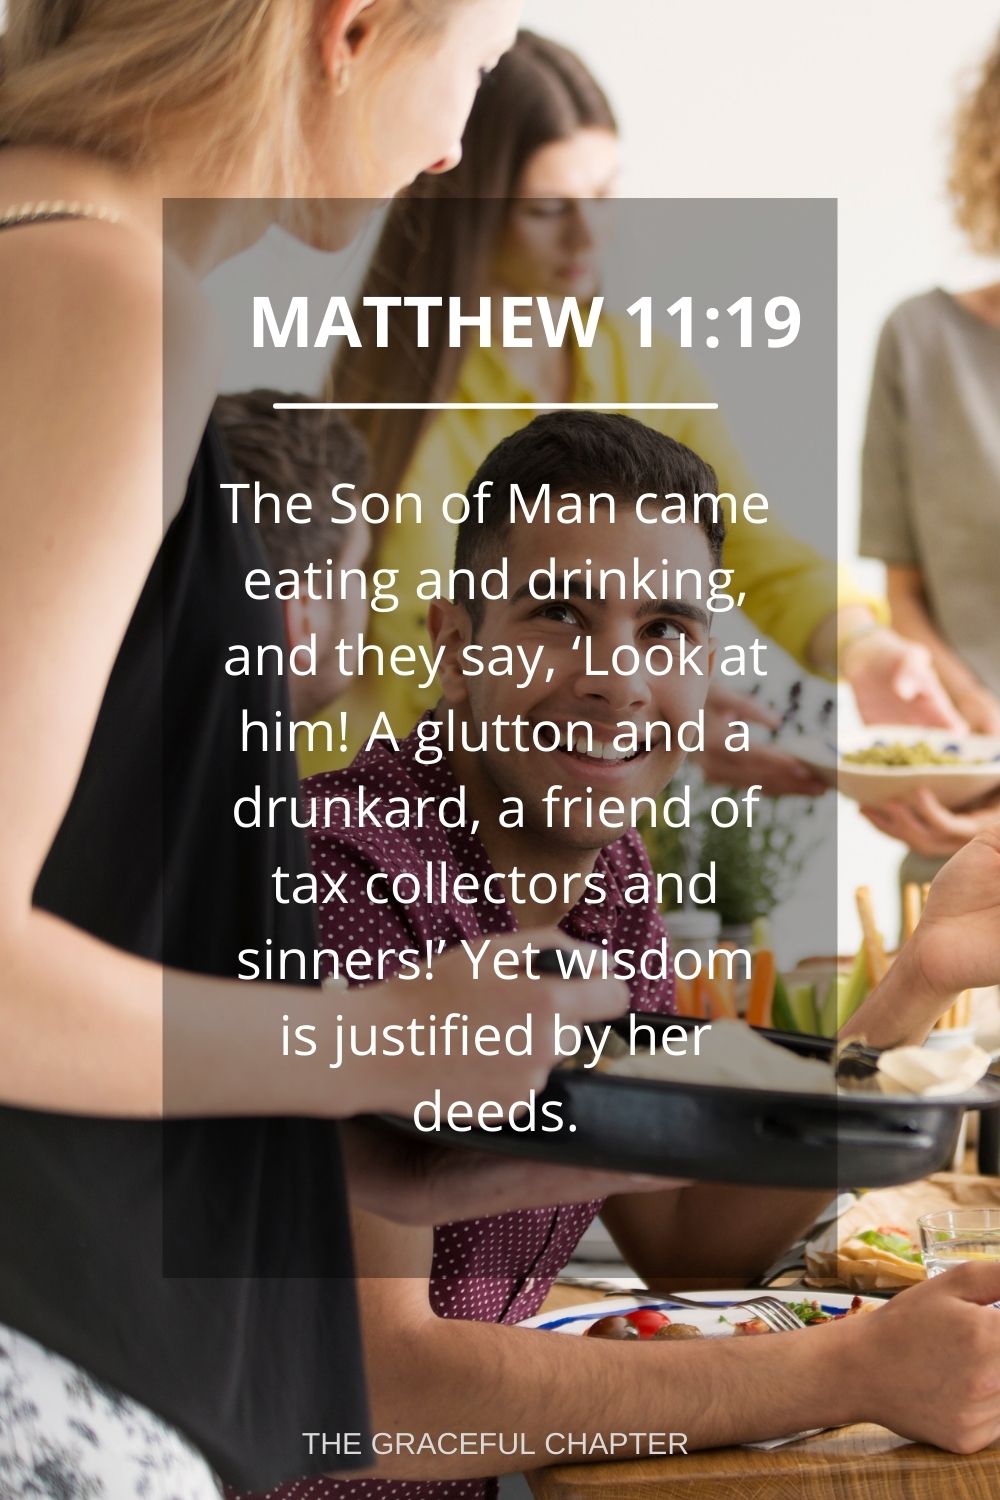 The Son of Man came eating and drinking, and they say, ‘Look at him! A glutton and a drunkard, a friend of tax collectors and sinners!’ Yet wisdom is justified by her deeds. Matthew 11:19